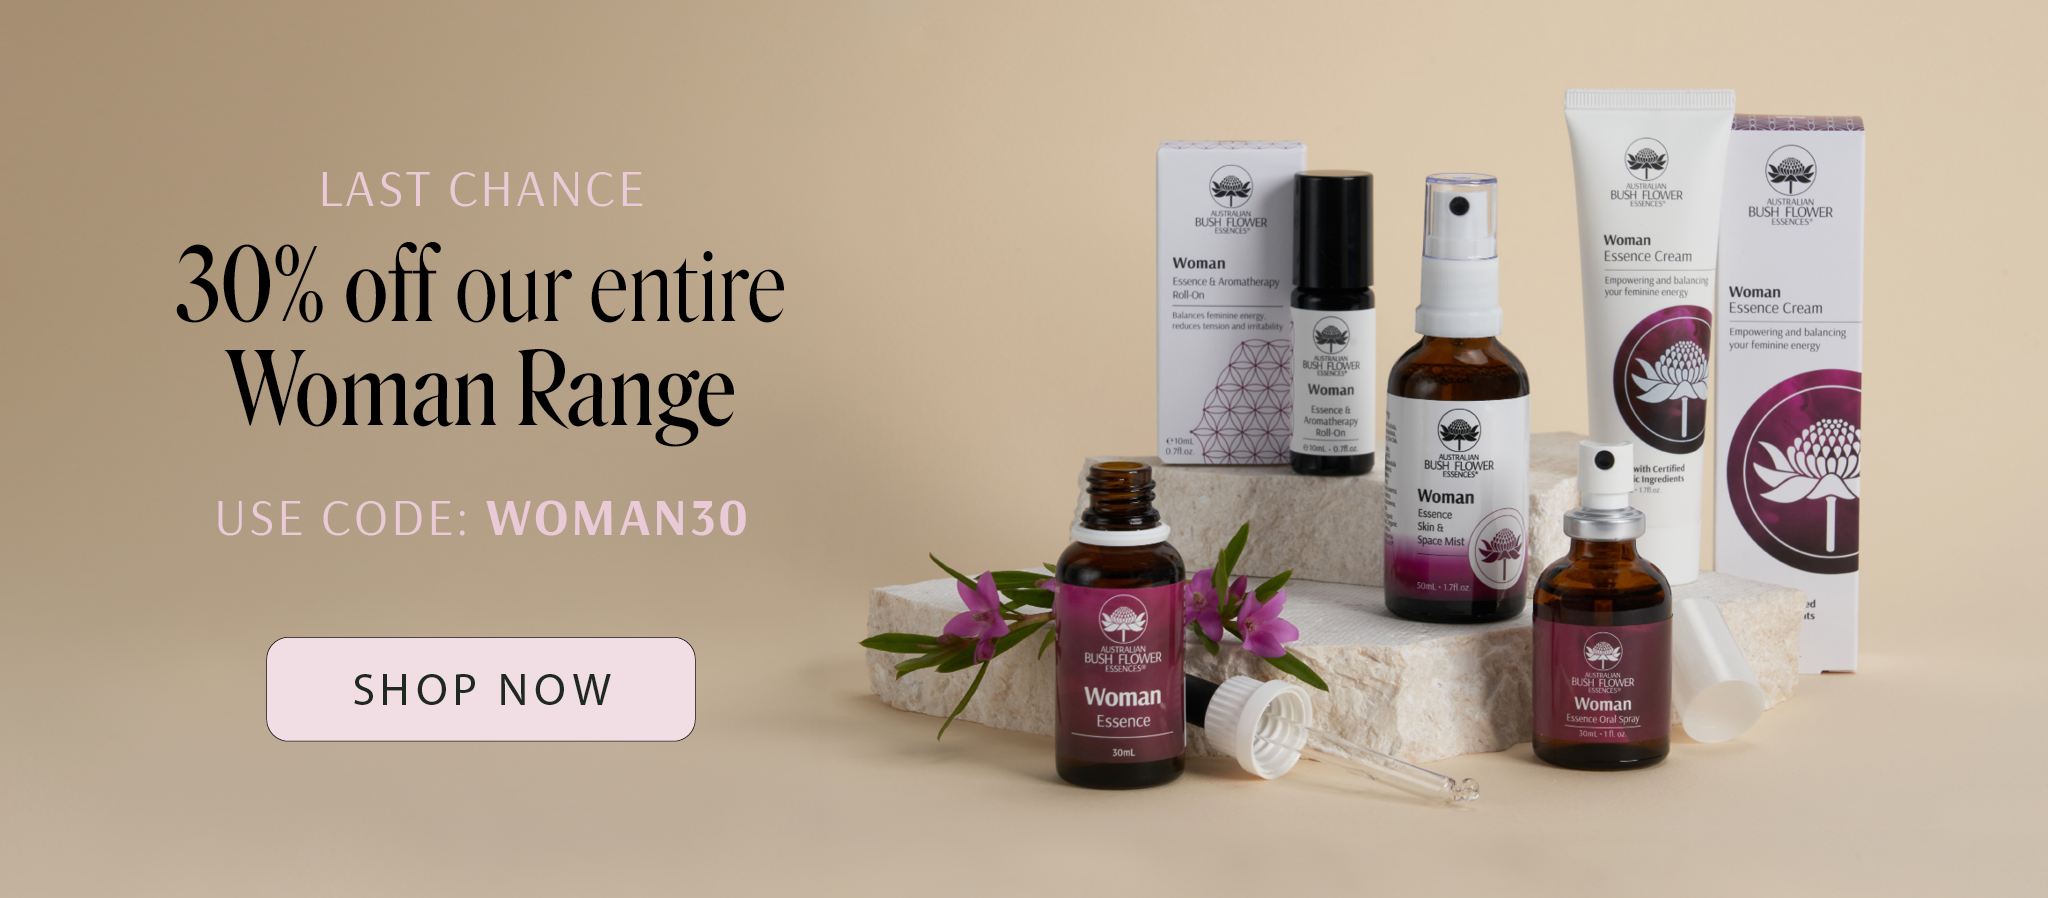 Last chance 30% off our entire Women Range. USE CODE: WOMAN30